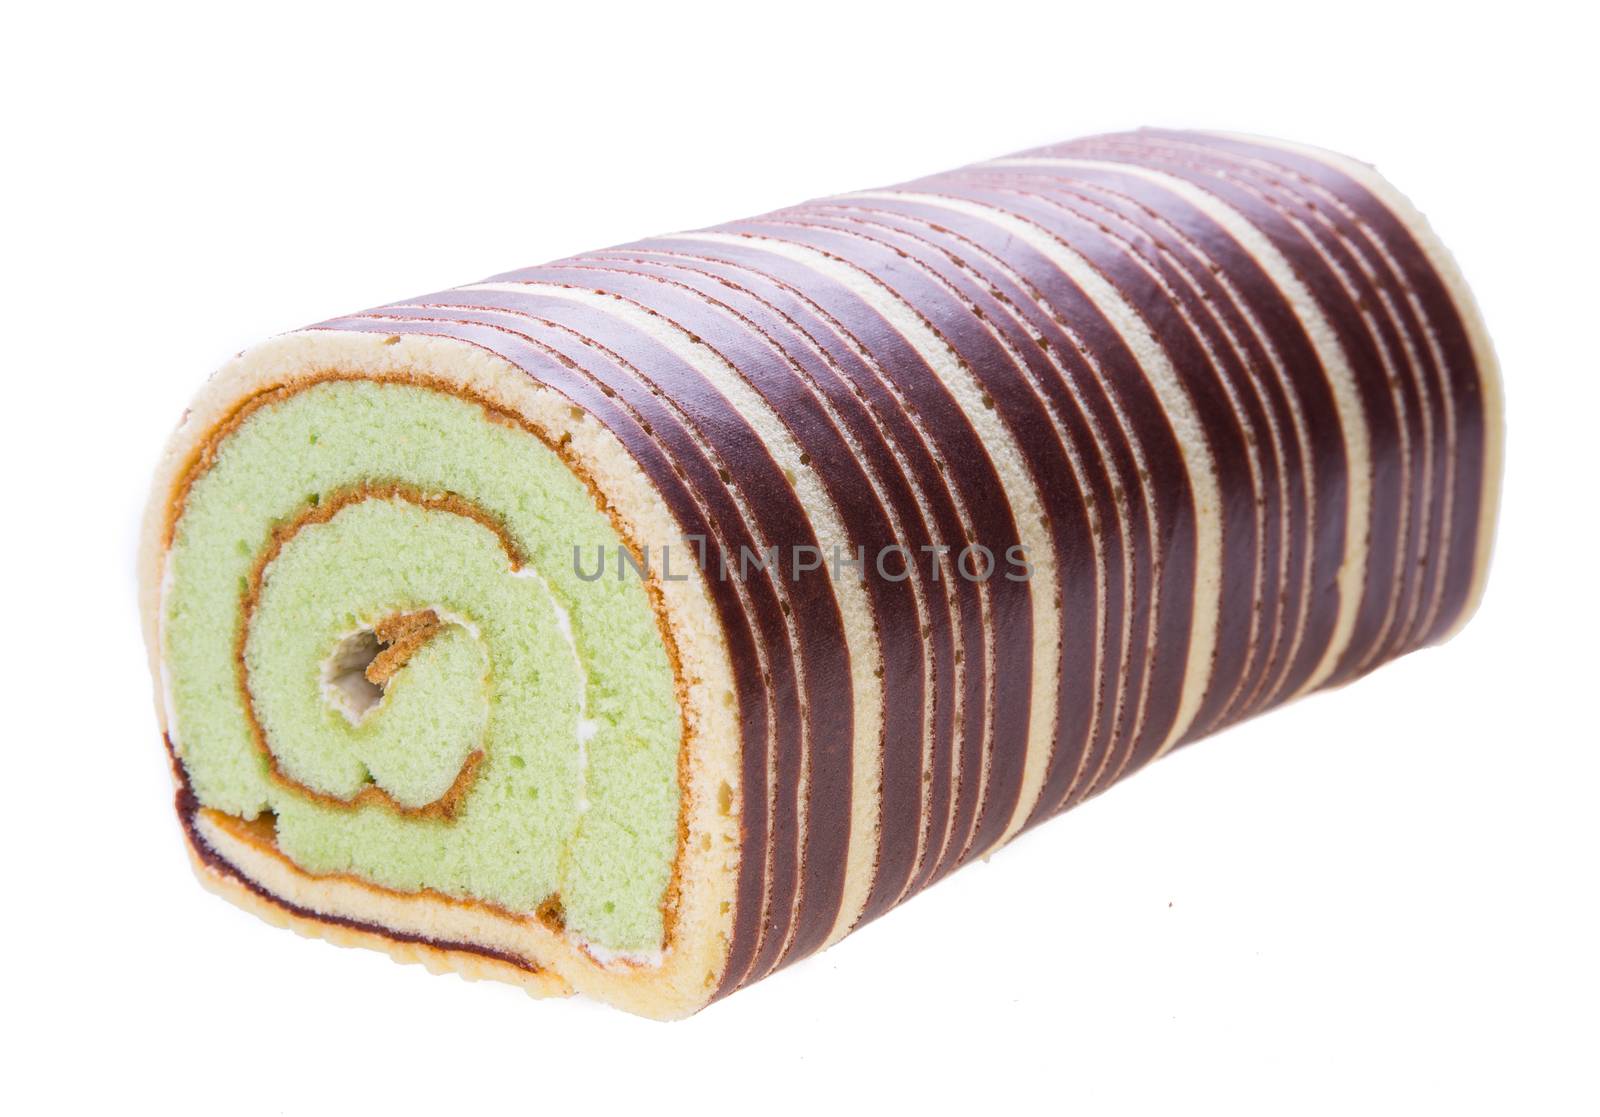 Swiss roll cake by tehcheesiong